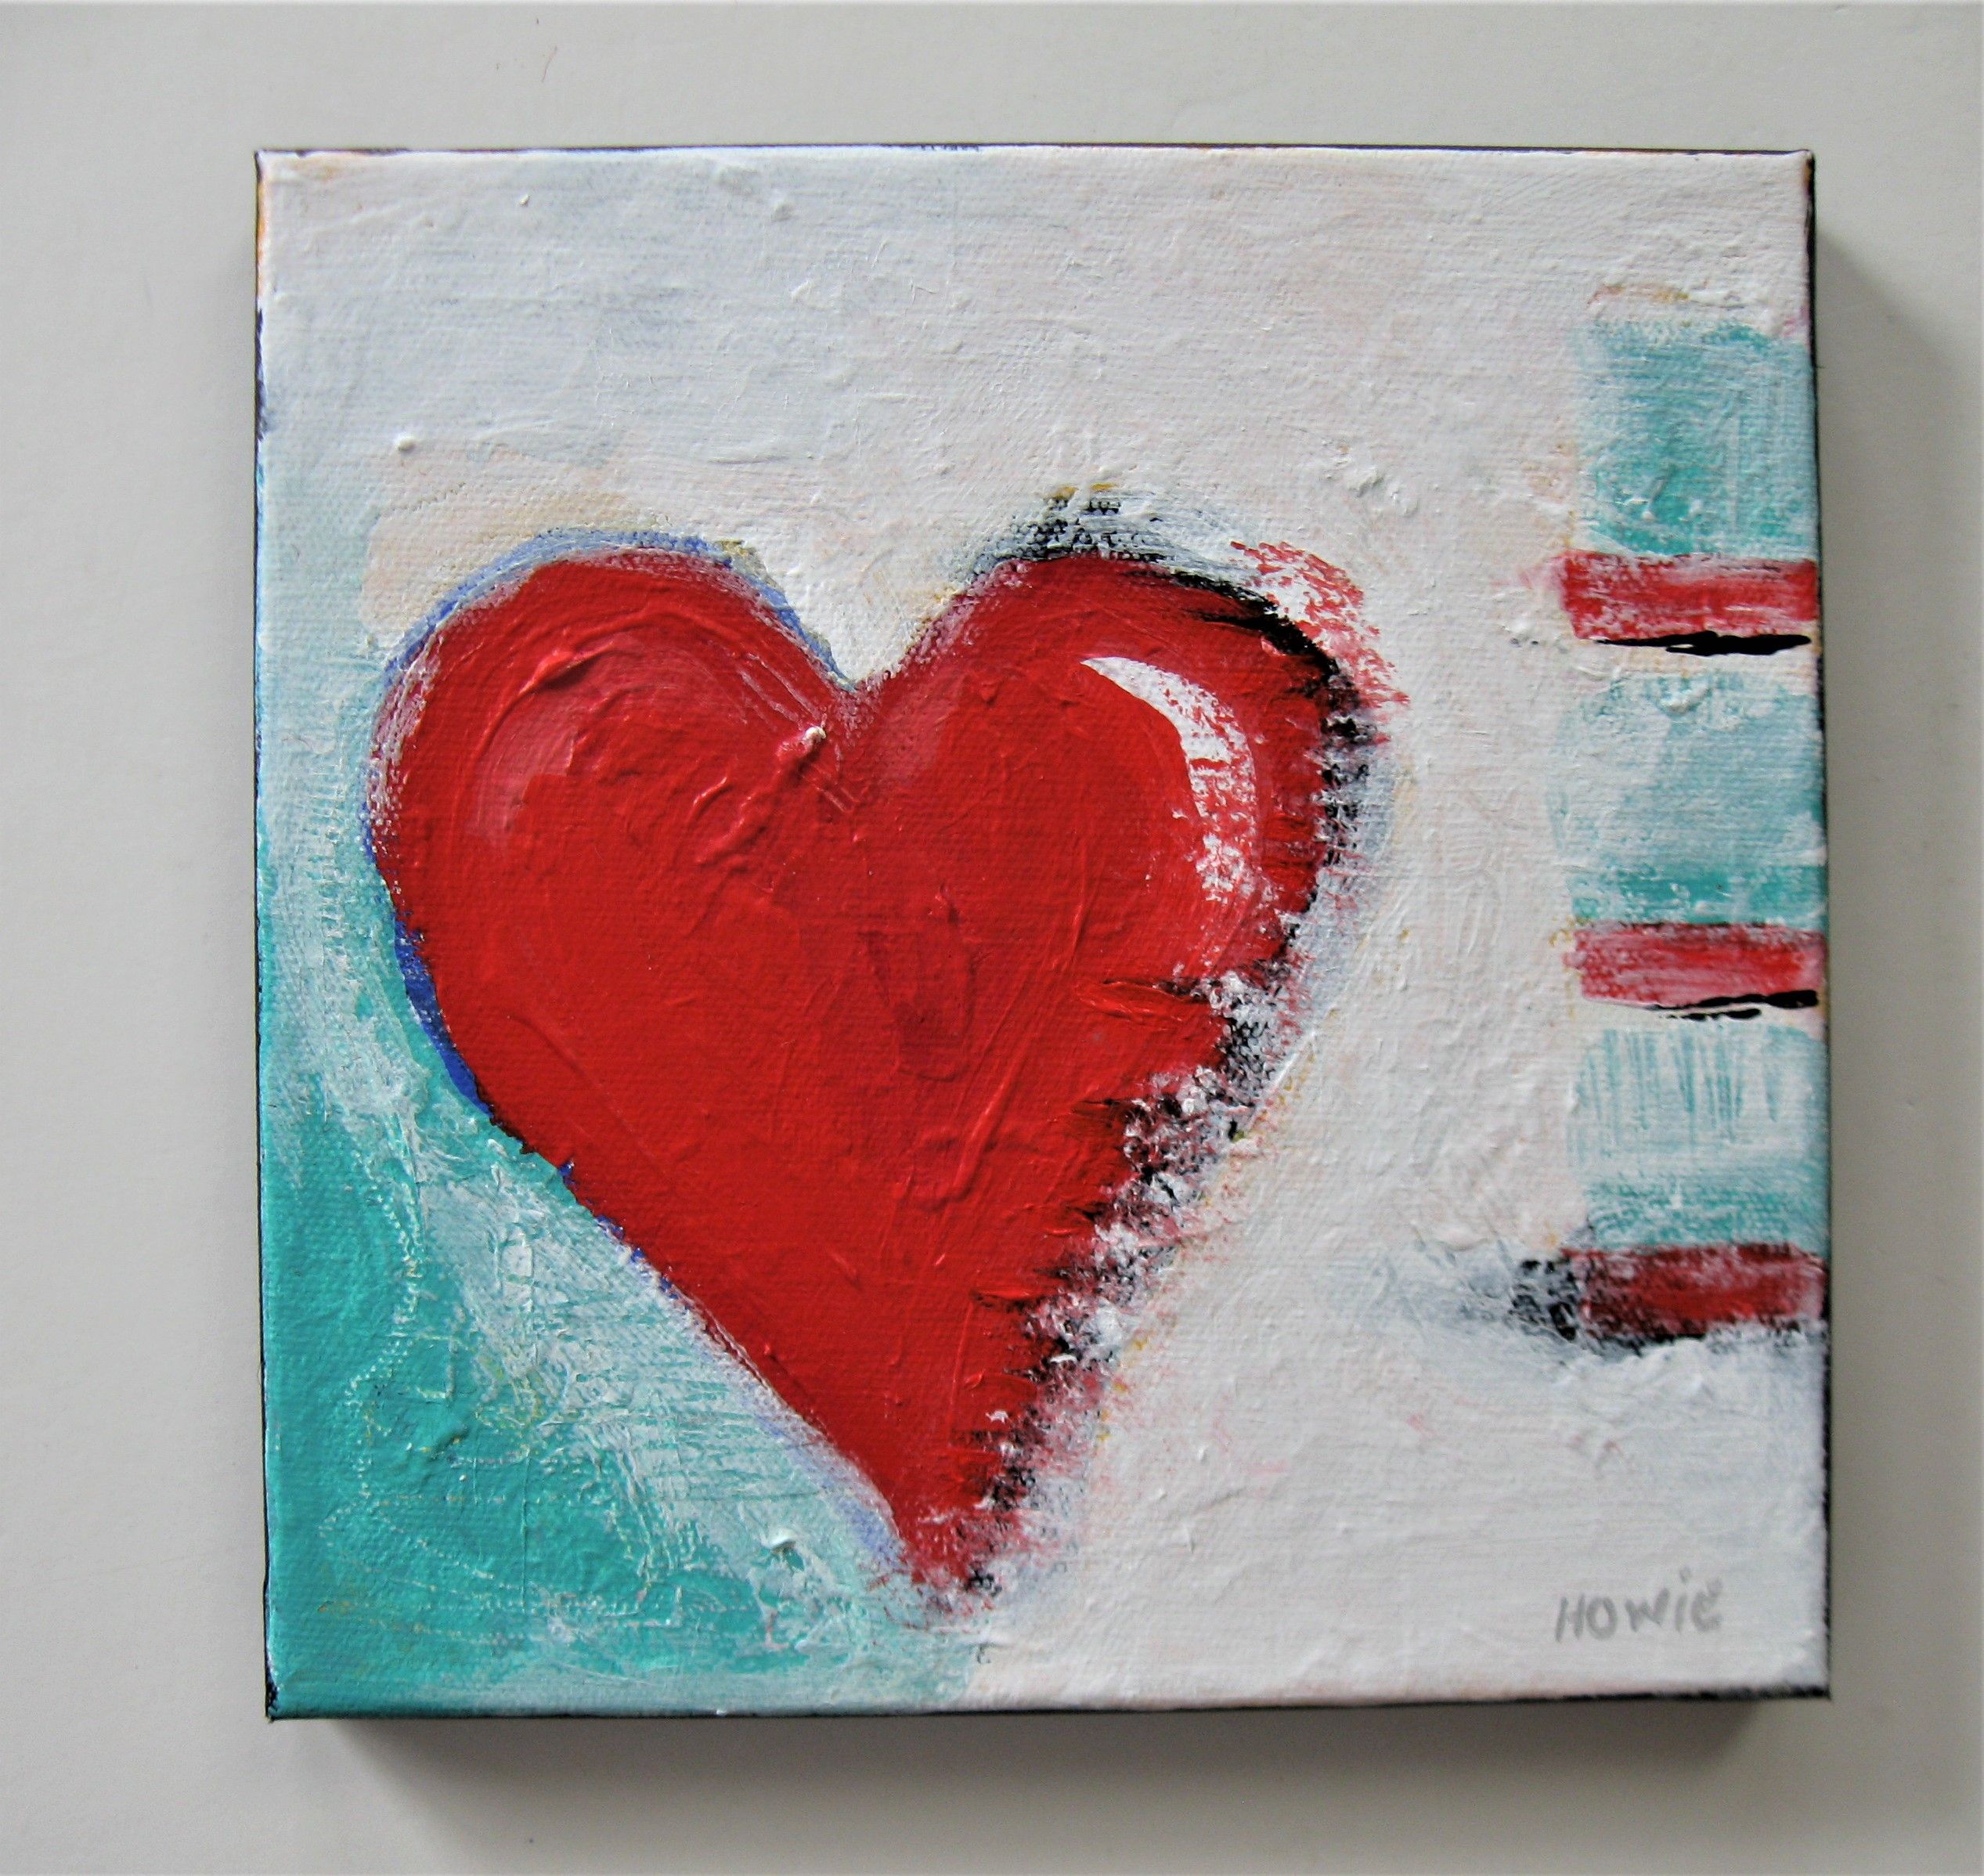 Buy Hand Crafted Original Acrylic Red Heart Painting Canvas, 8 X 8, made  to order from Brooke Howie Paintings